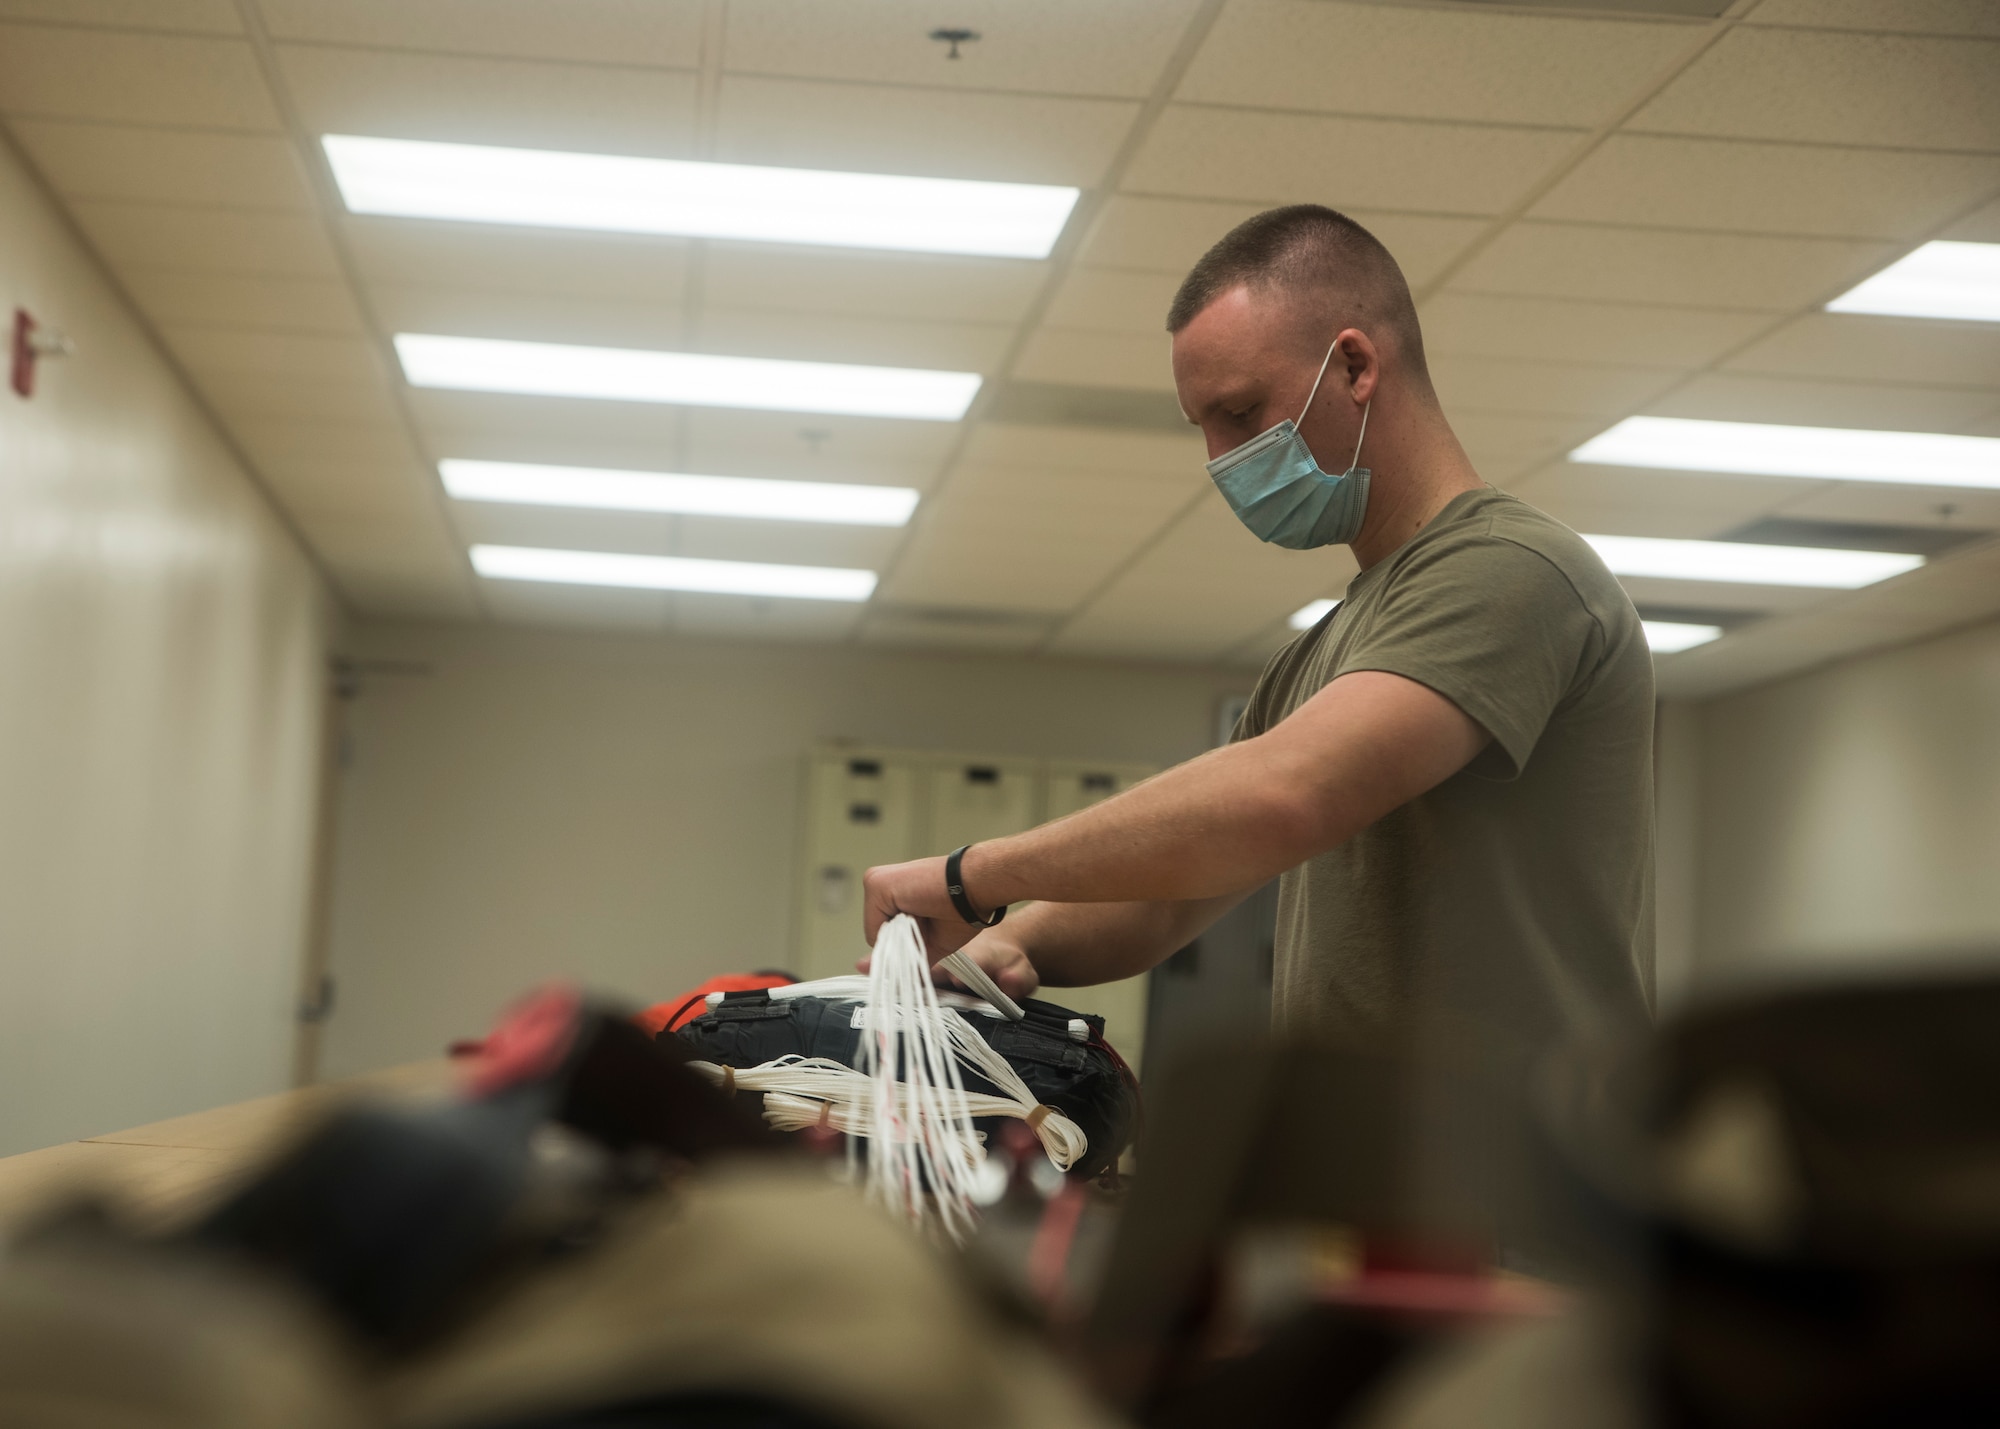 A photo of an Airman working on equipment